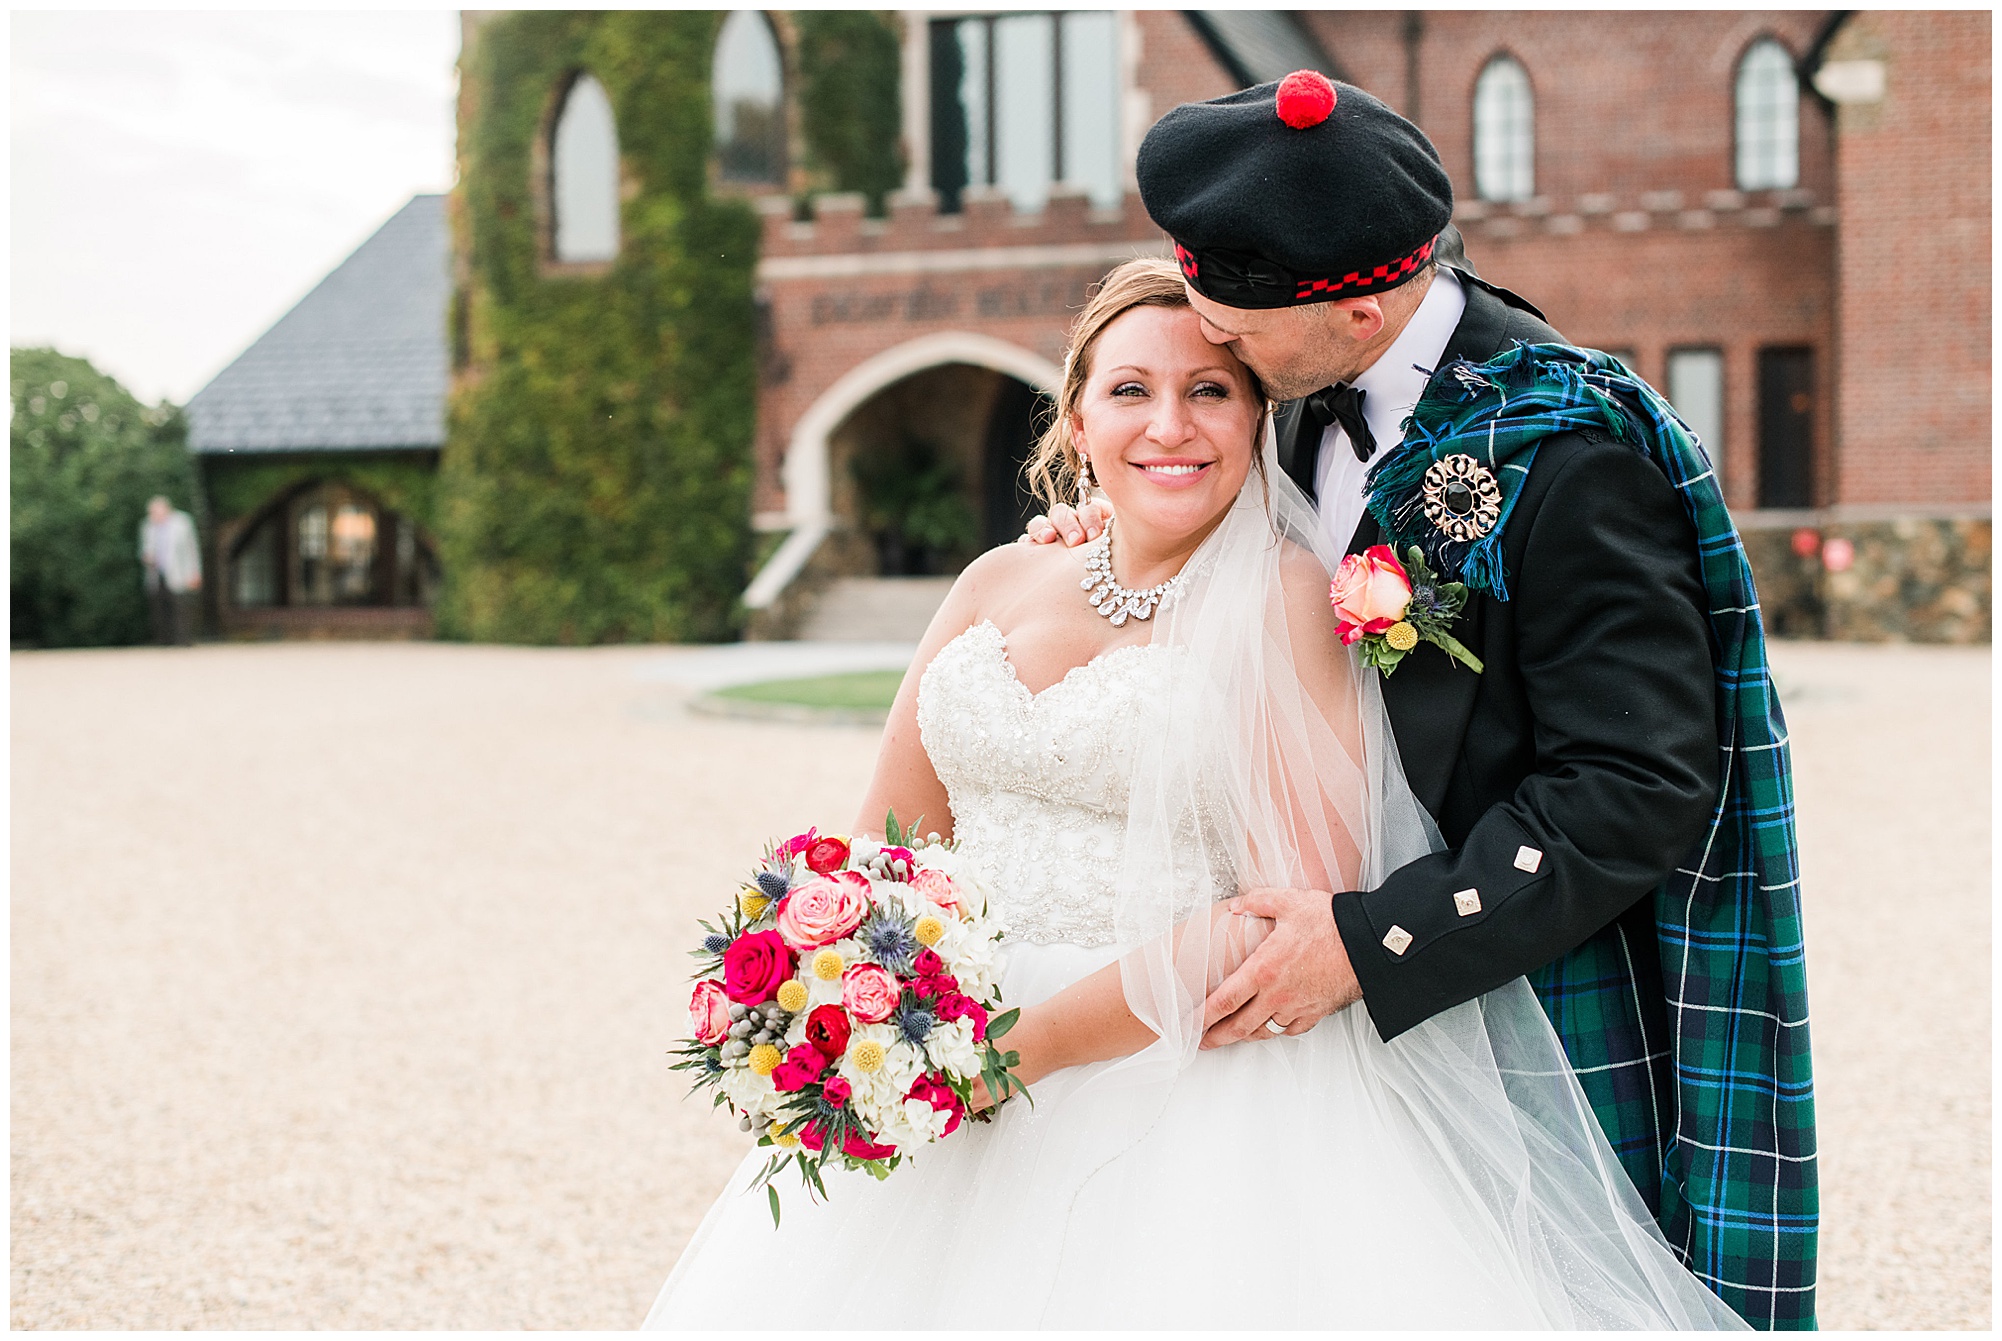 Glitzy Dover Hall Wedding with a Touch of Scottland | MANAKIN SABOT, VA by RVA wedding photographer, Sarah & Dave Photography